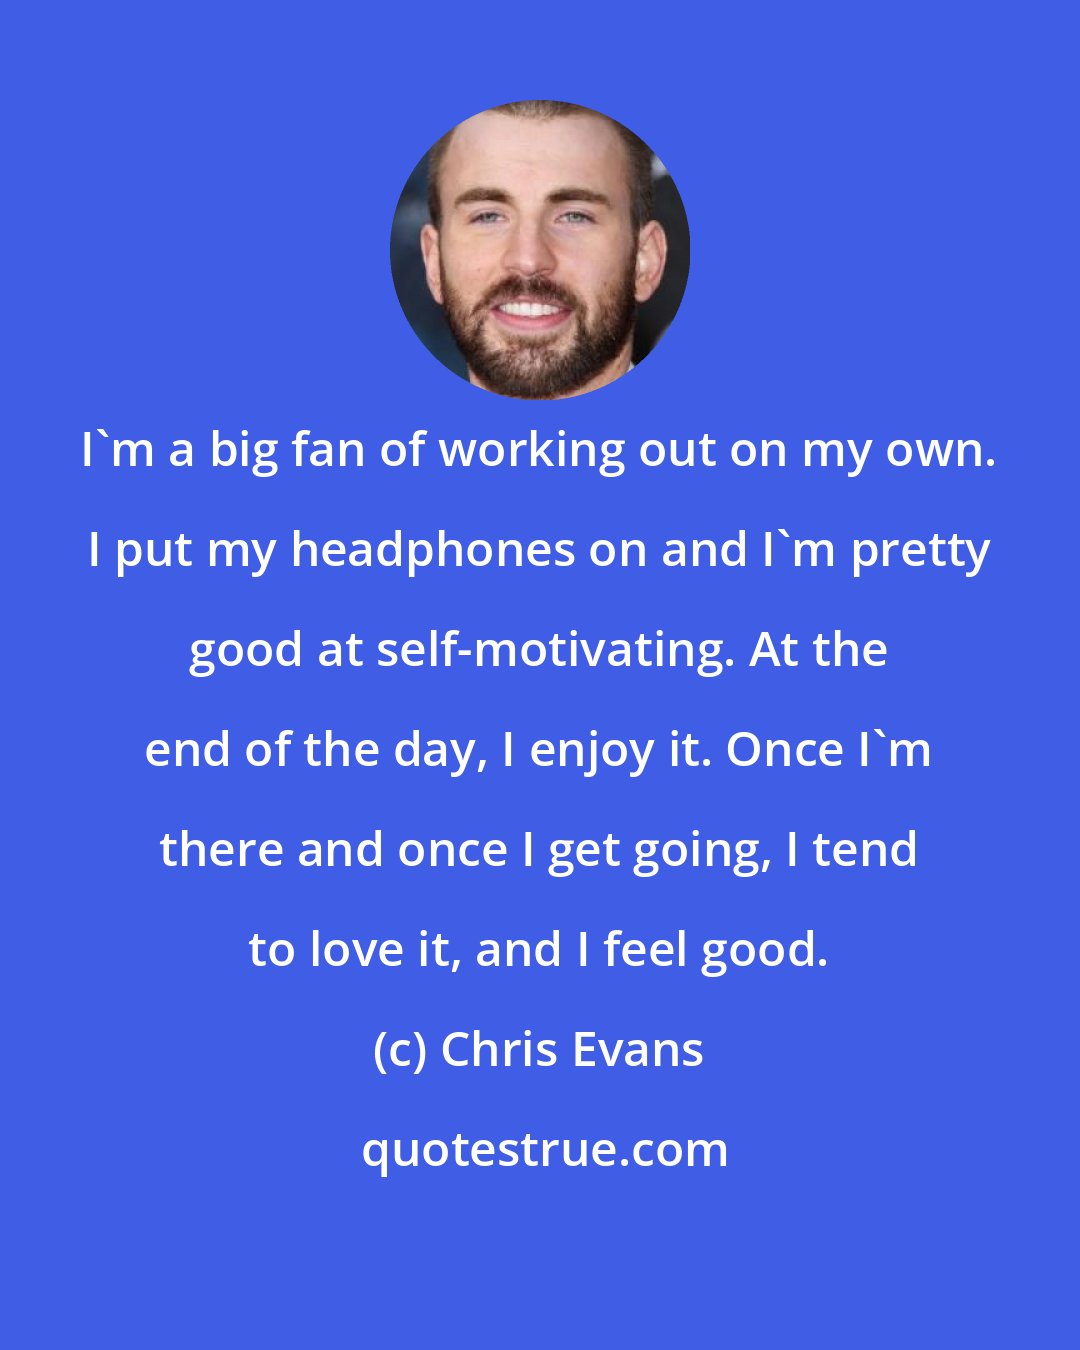 Chris Evans: I'm a big fan of working out on my own. I put my headphones on and I'm pretty good at self-motivating. At the end of the day, I enjoy it. Once I'm there and once I get going, I tend to love it, and I feel good.